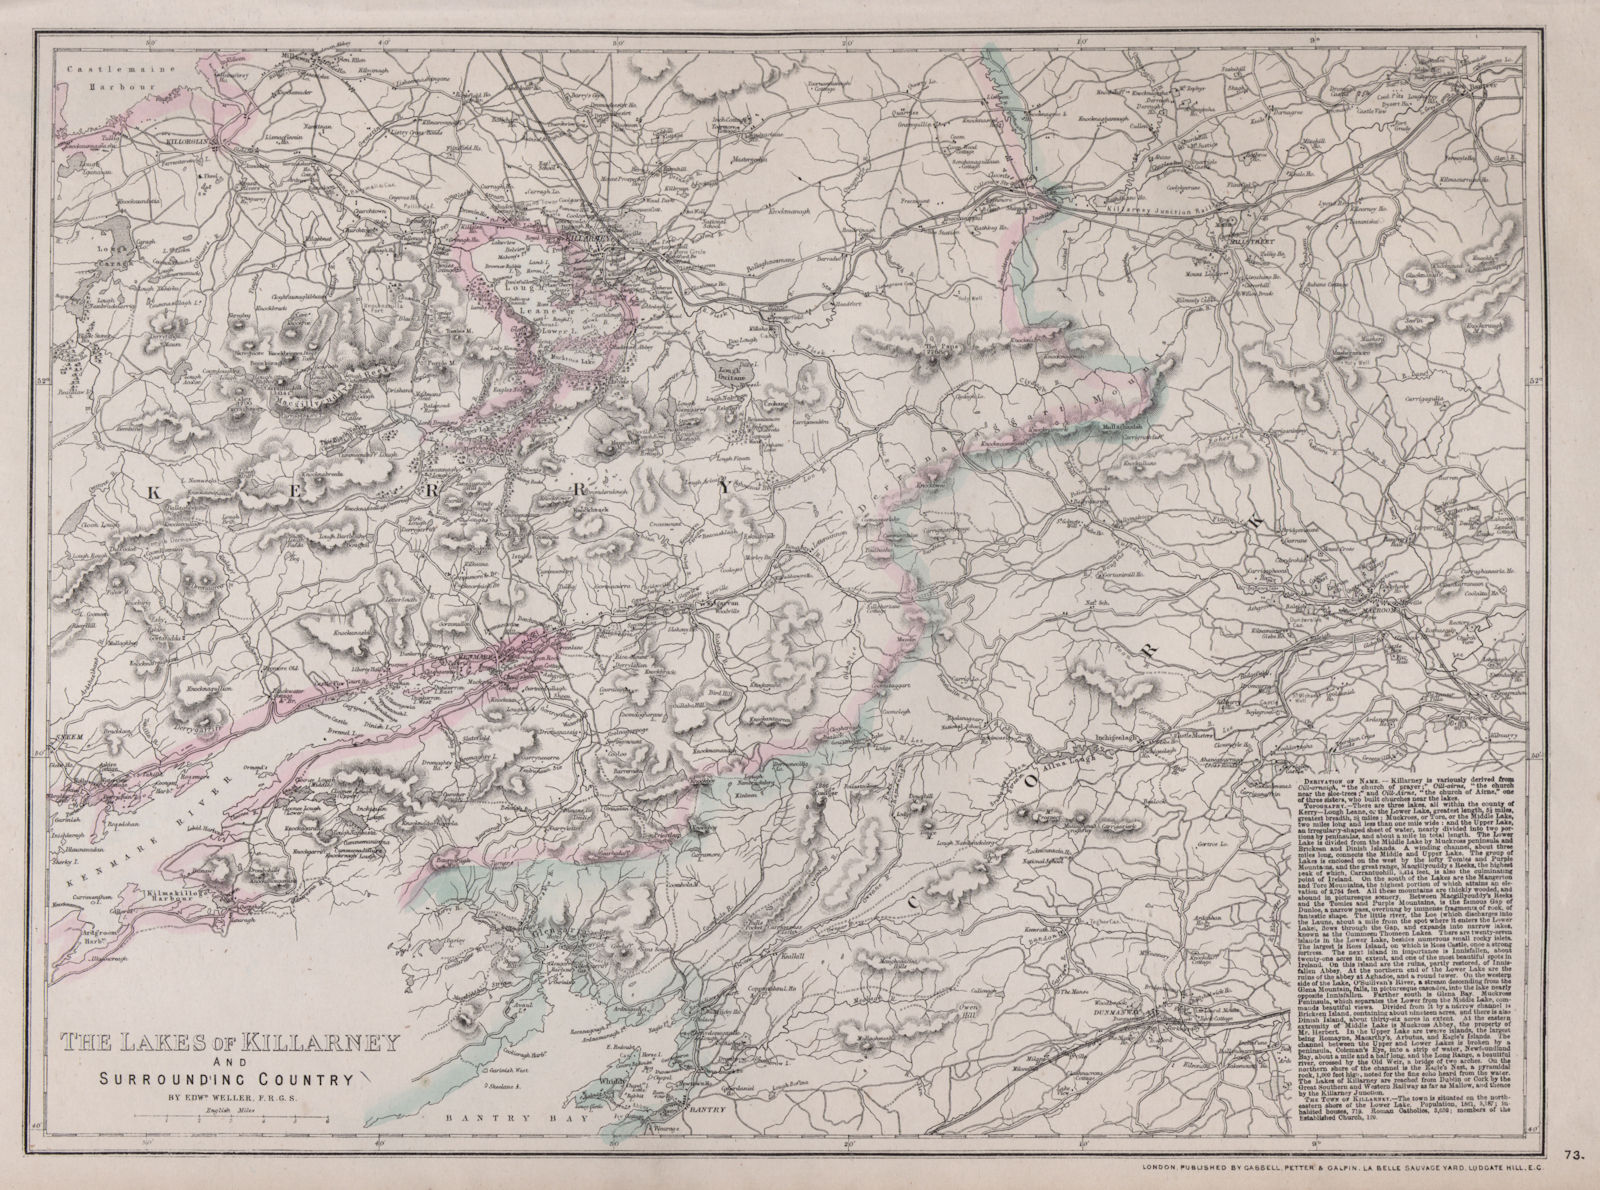 Associate Product 'The Lakes of Killarney & surrounding Country' Kenmare Ireland. WELLER 1868 map